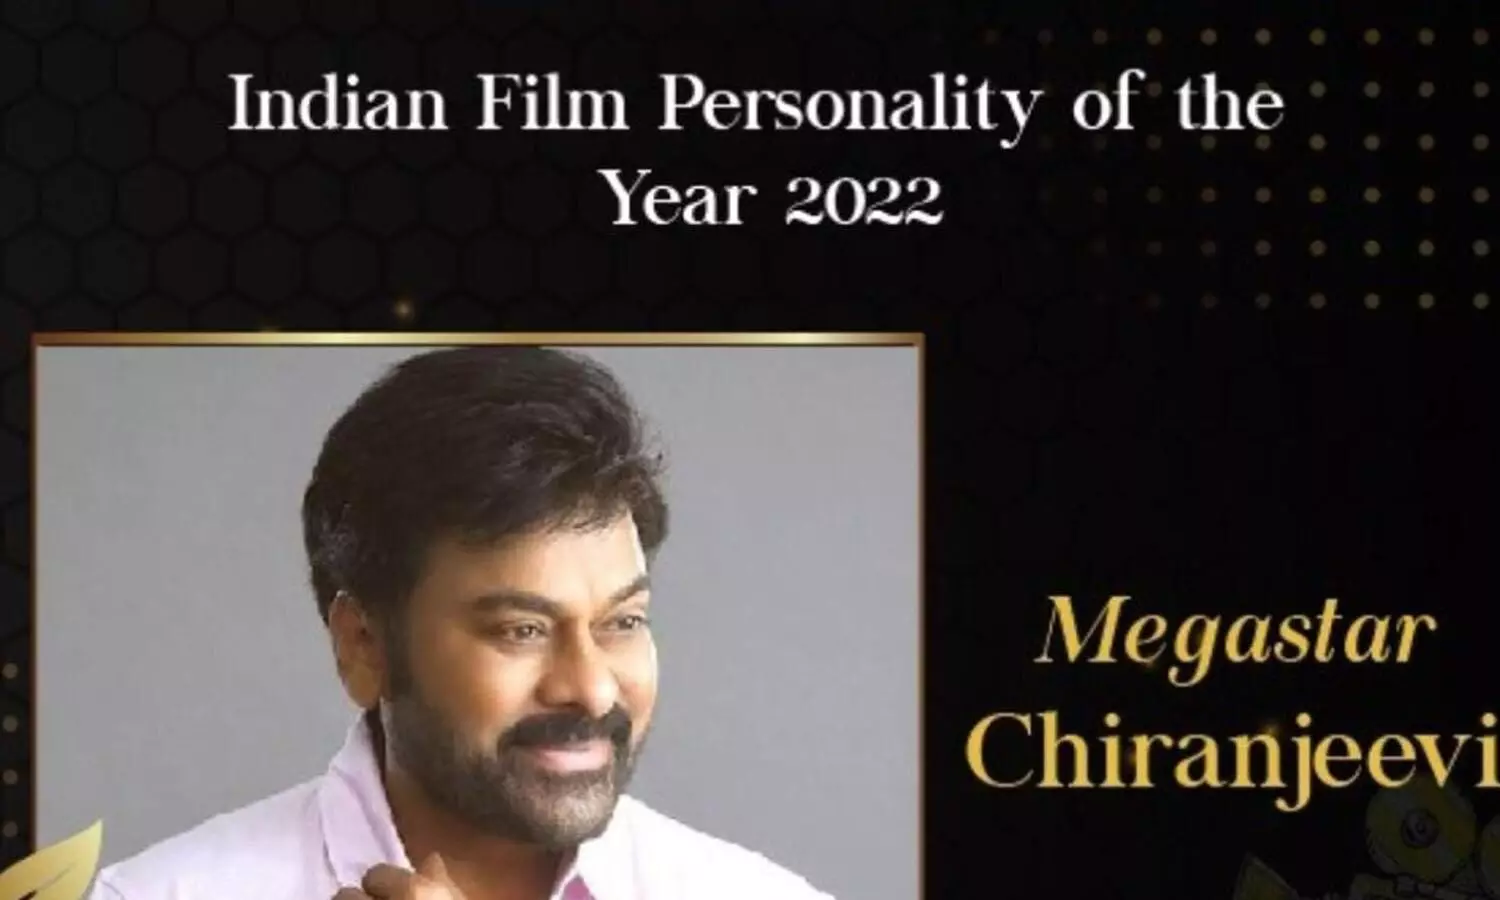 Megastar Chiranjeevi named Indian Film Personality of 2022 by IFFI